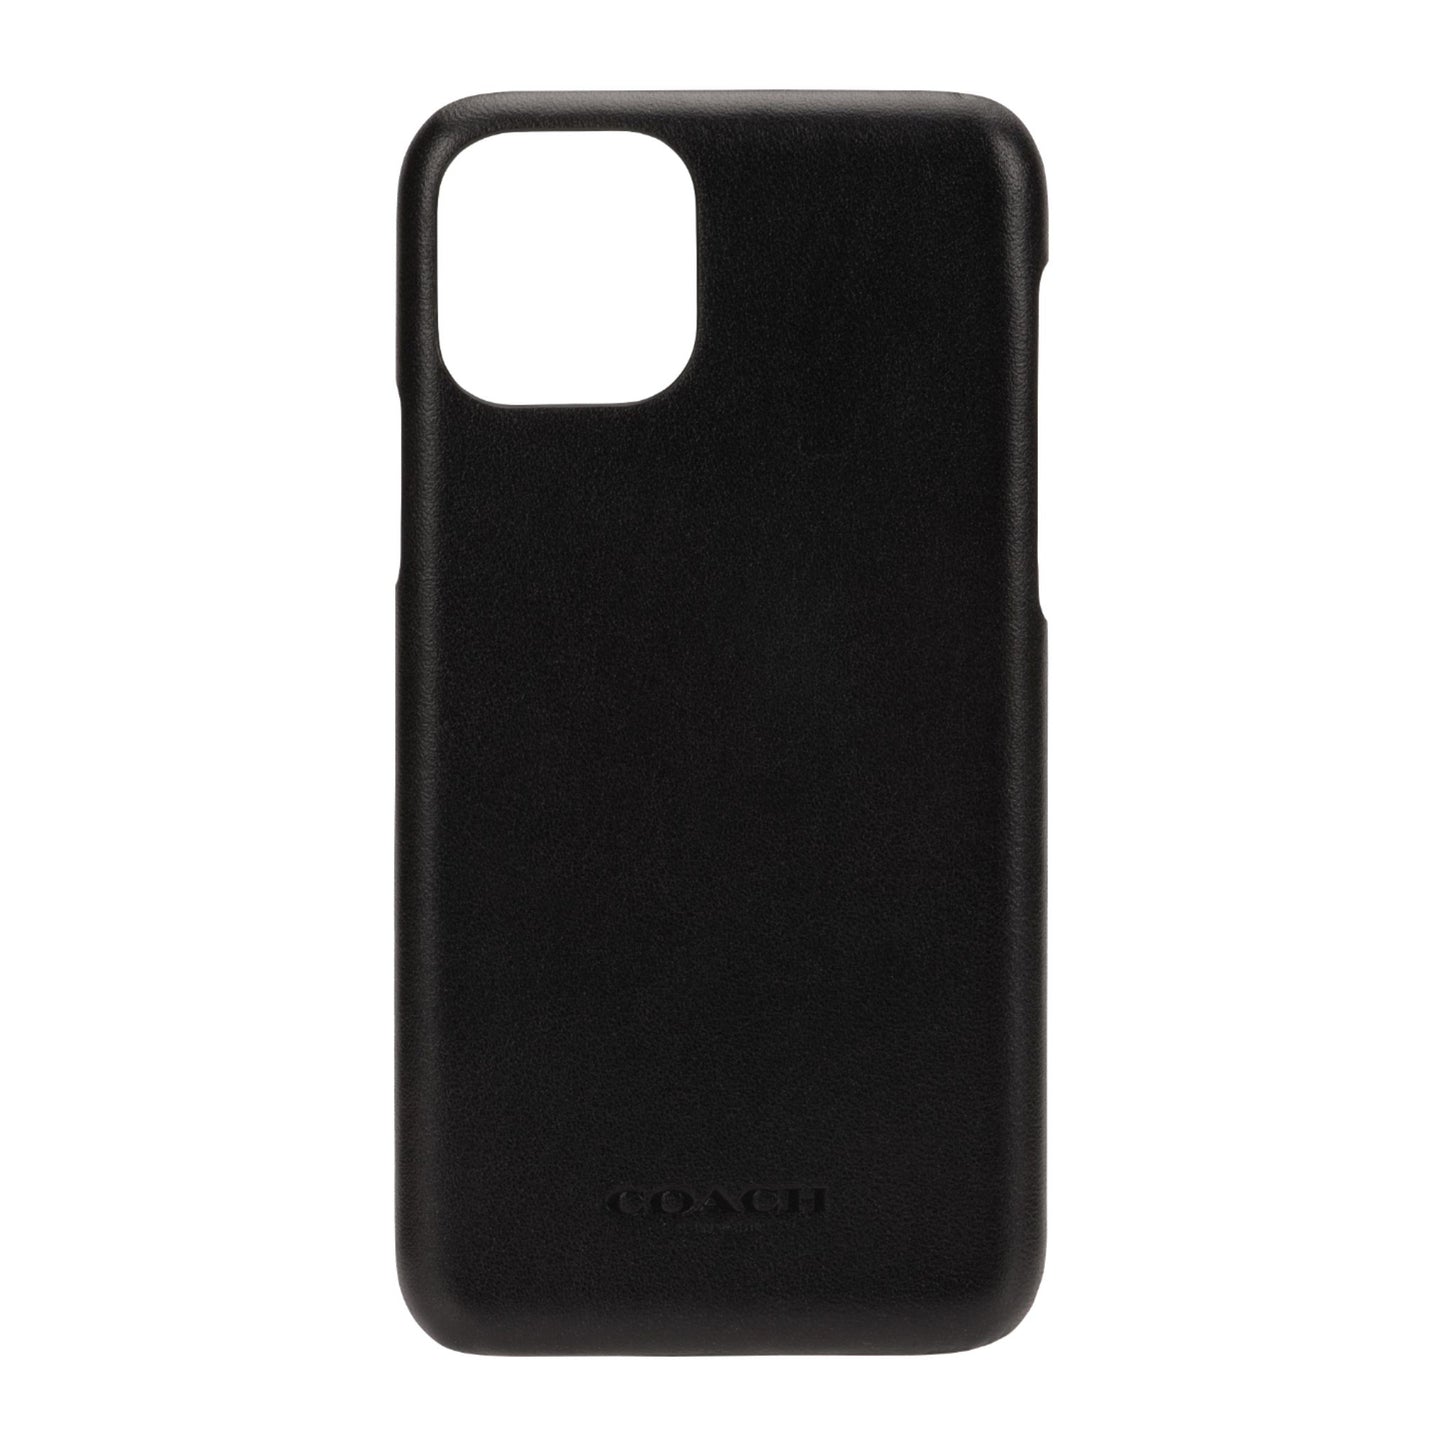 Coach - Leather Slim Protective Case for iPhone 12 Mini - Black